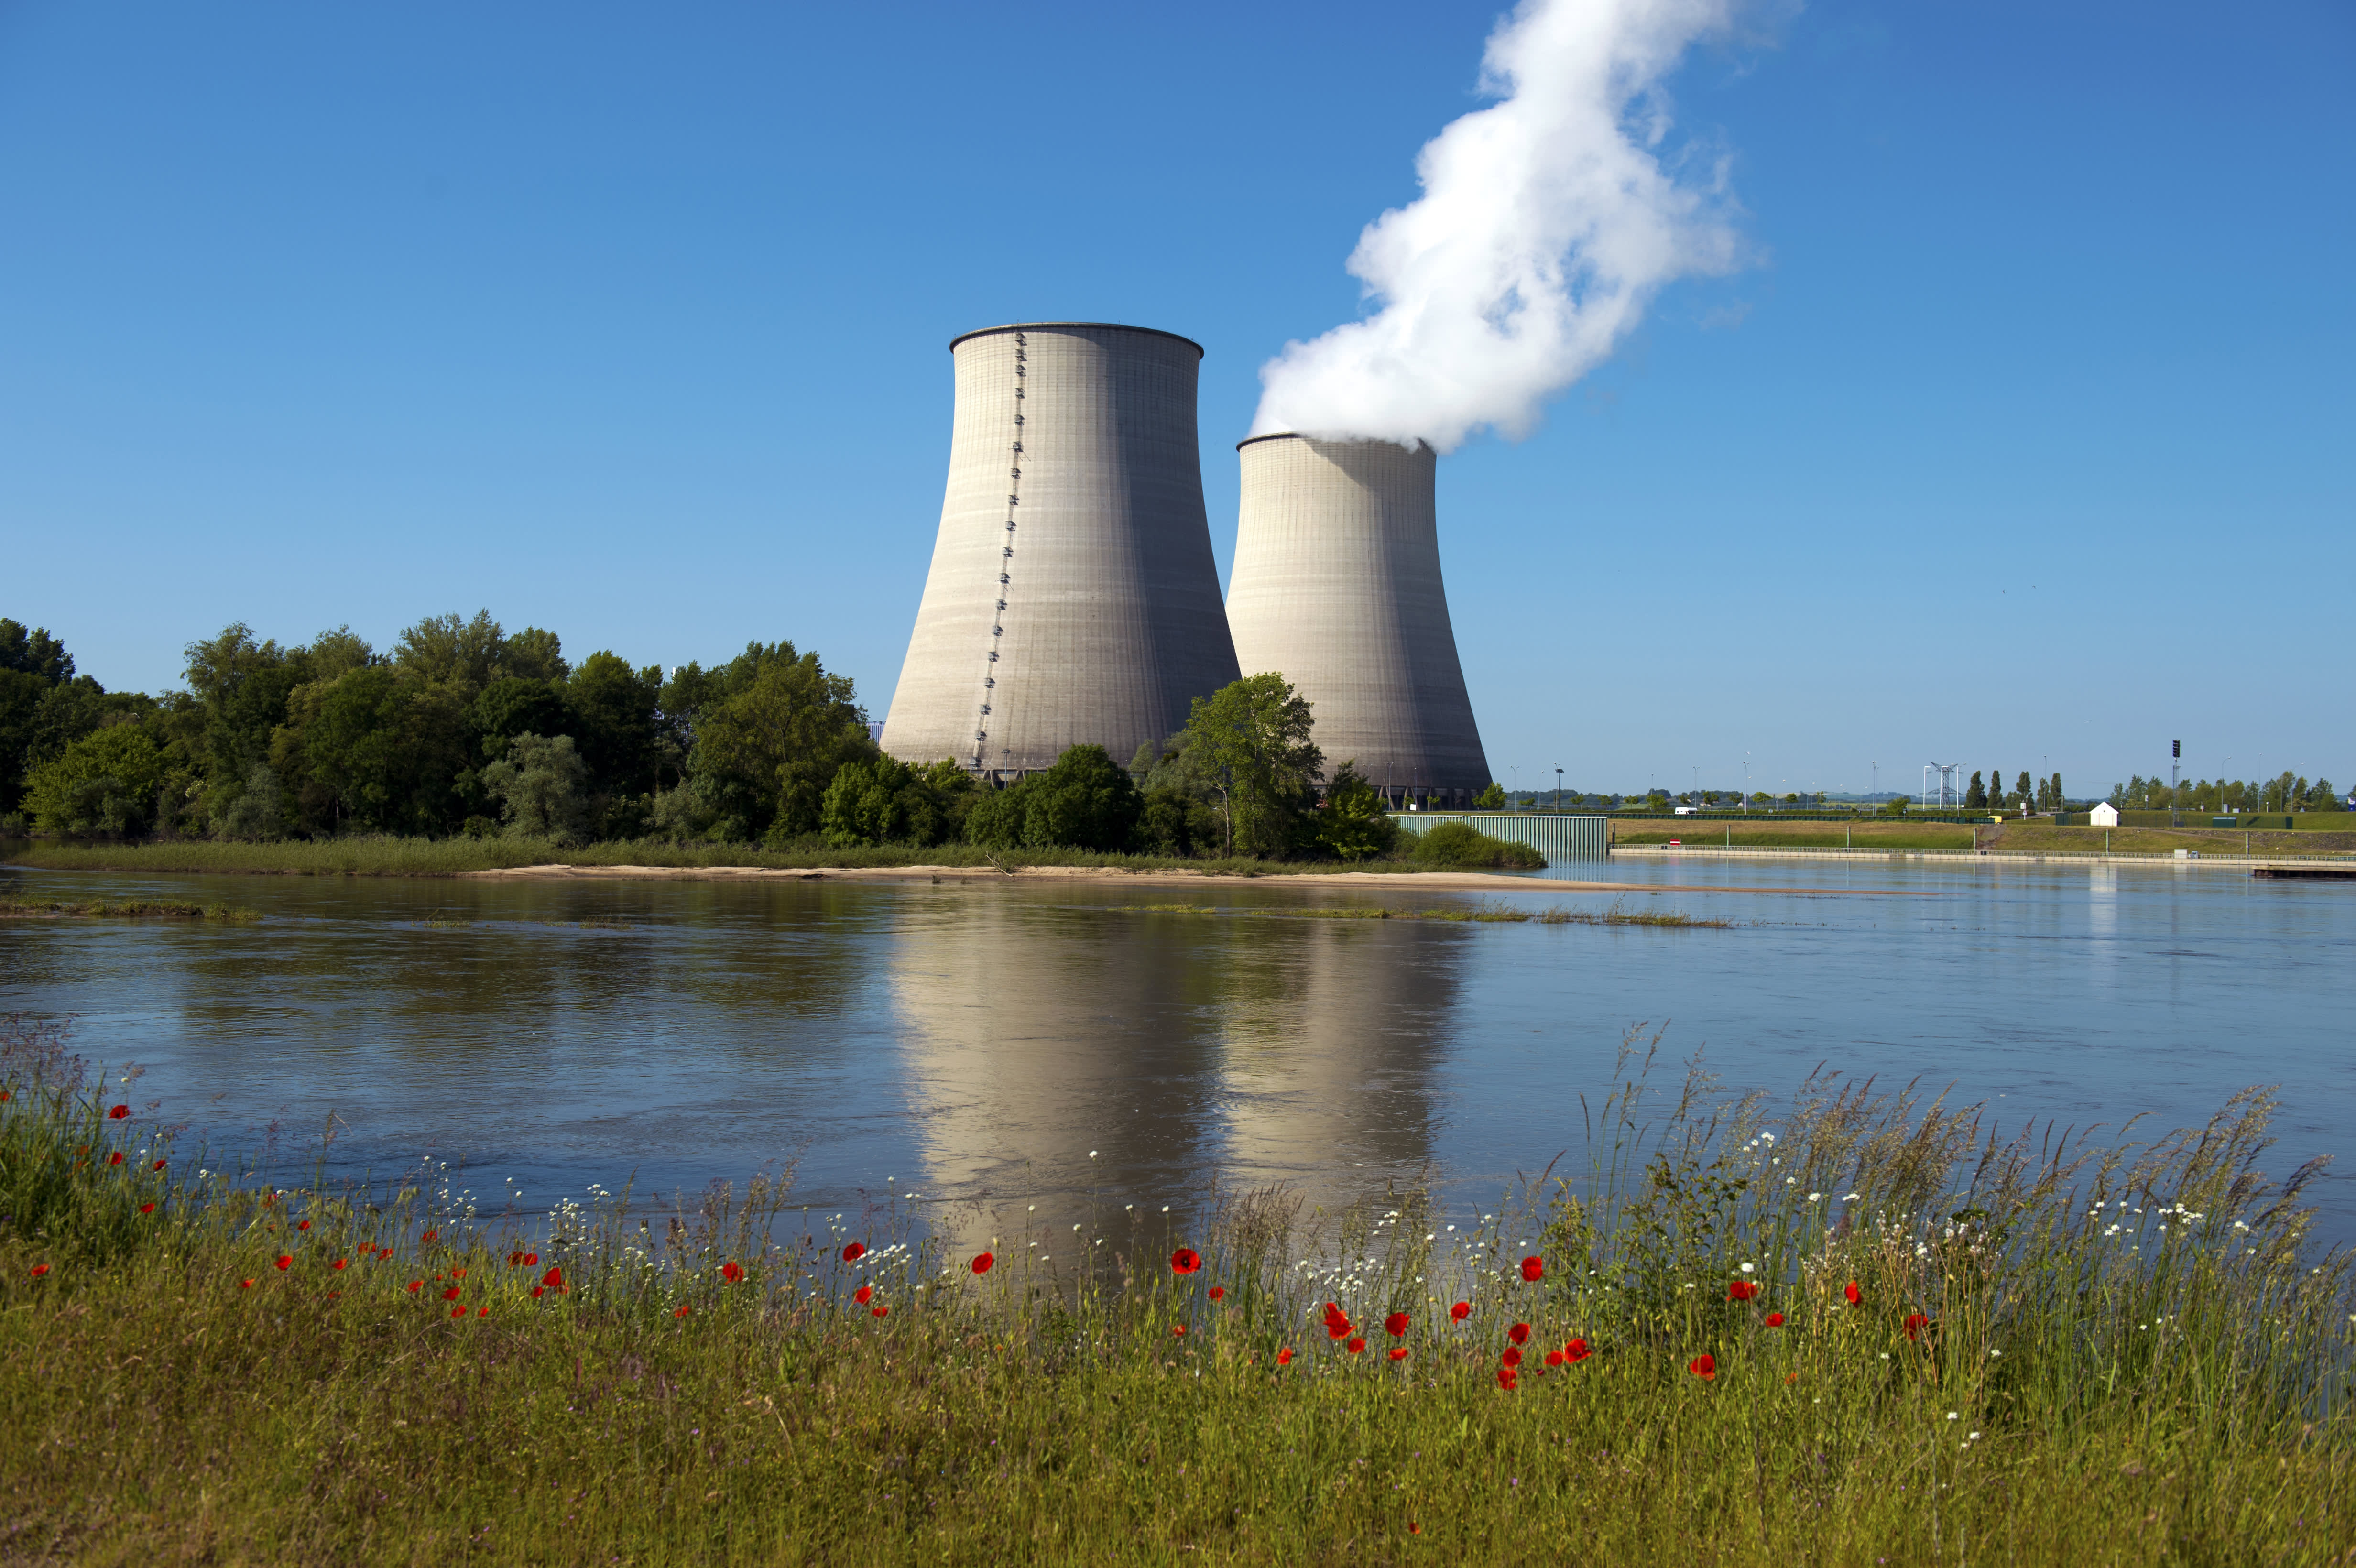 France’s love affair with nuclear energy will continue, but the change is in full swing